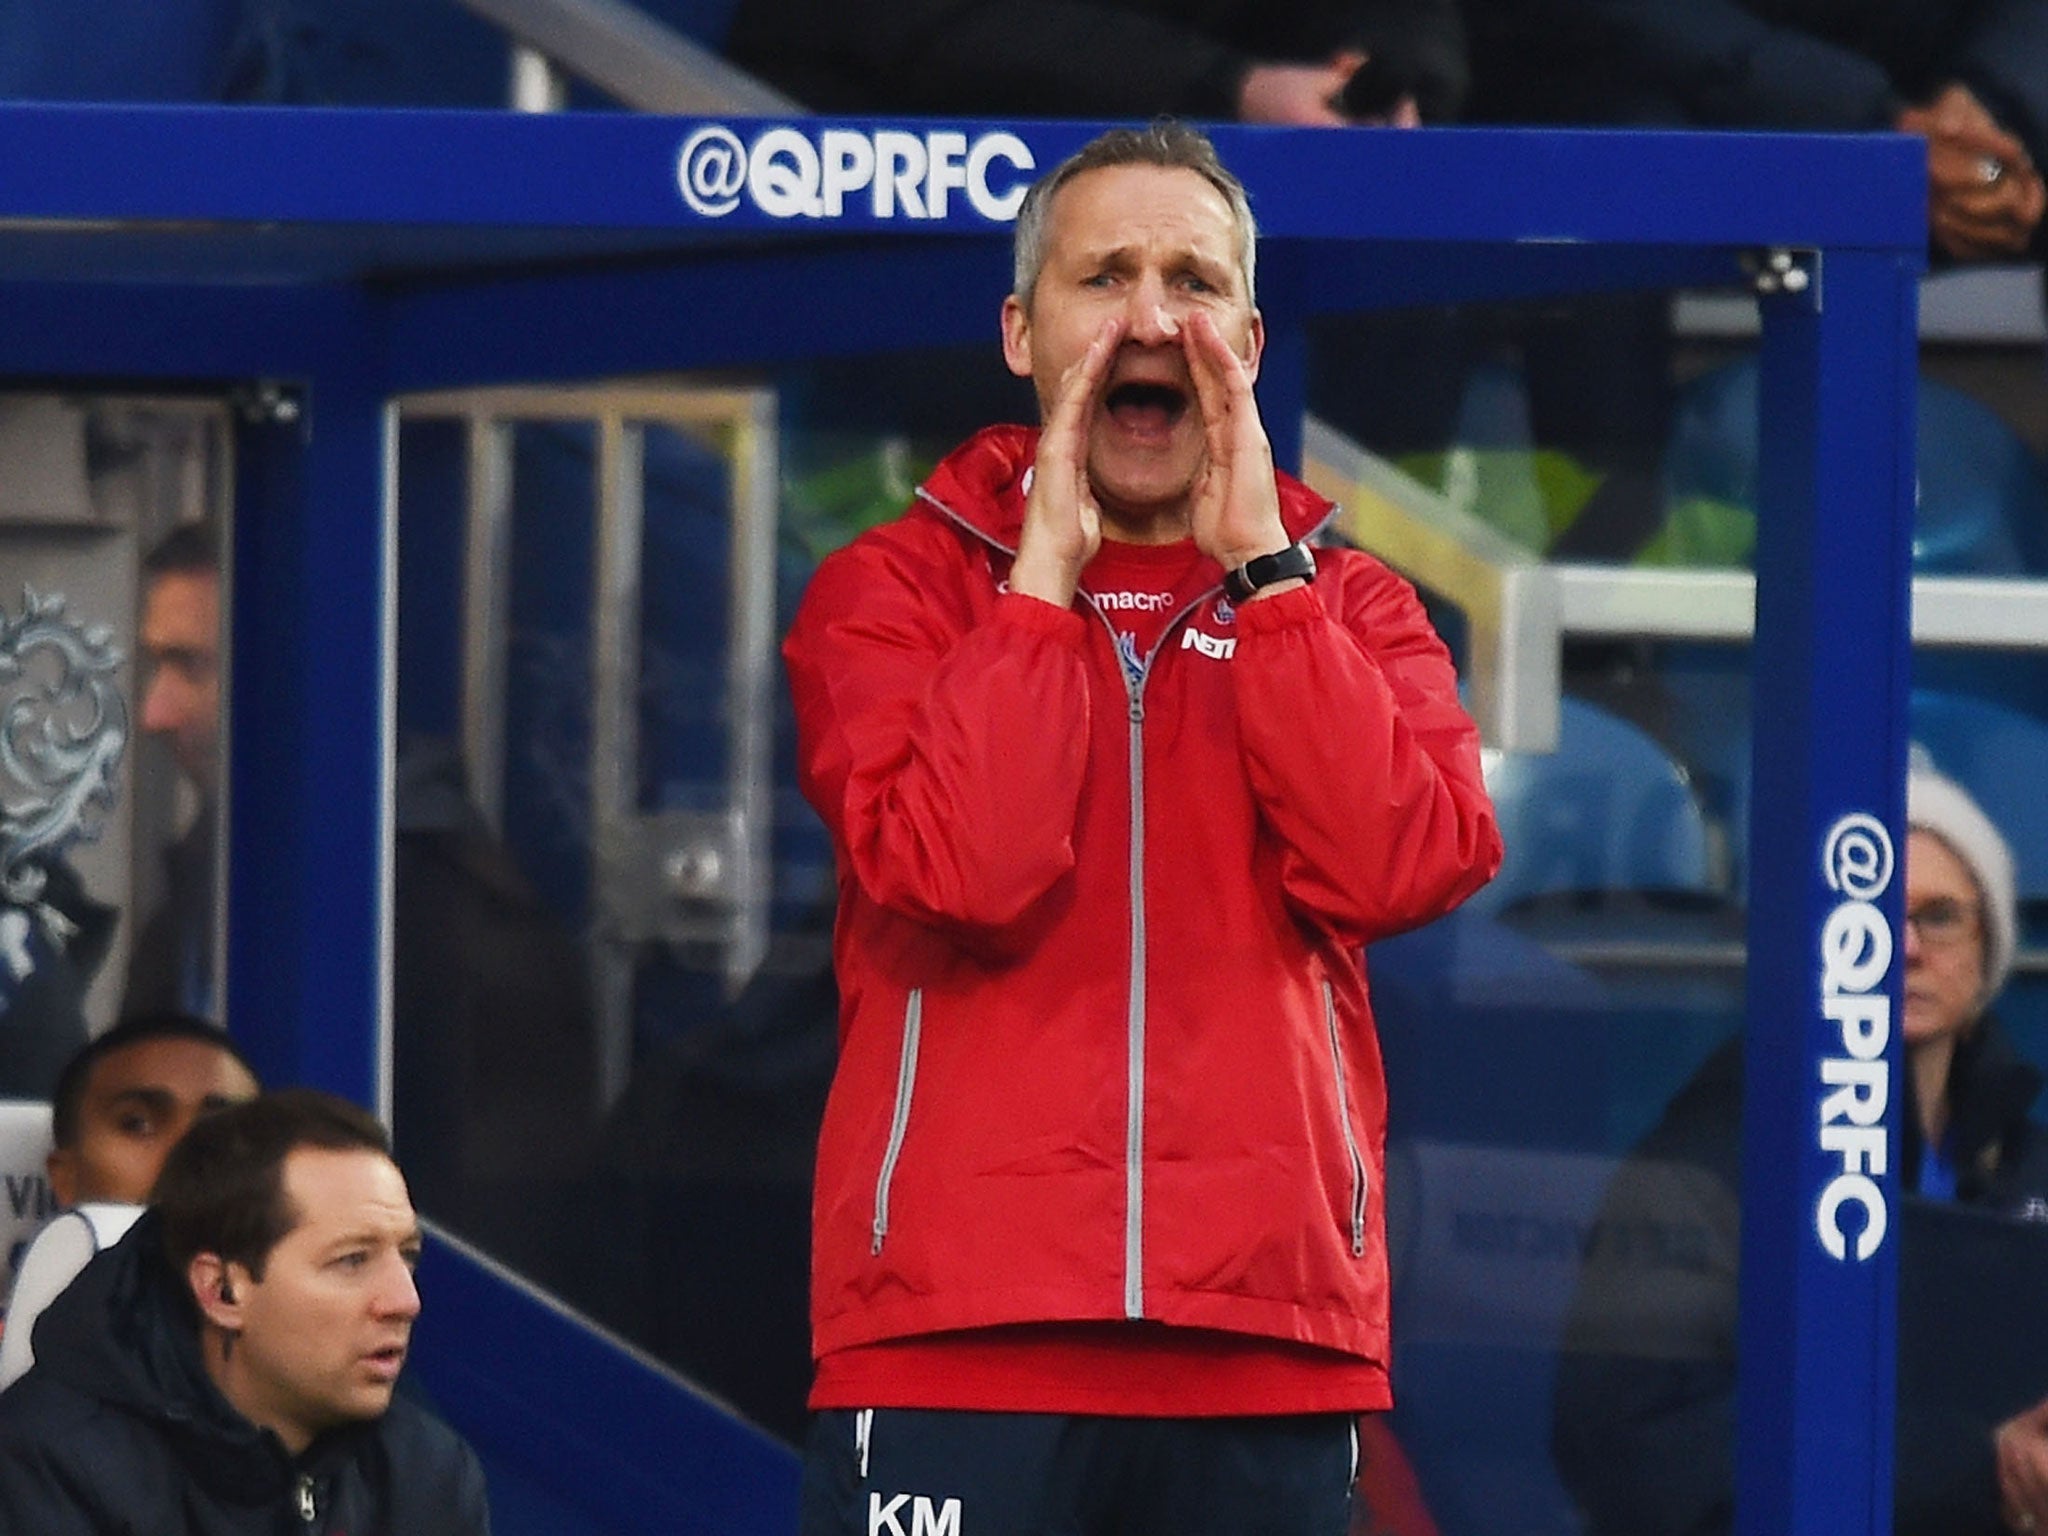 Palace's caretaker manager Keith Millen reacts on the touchline